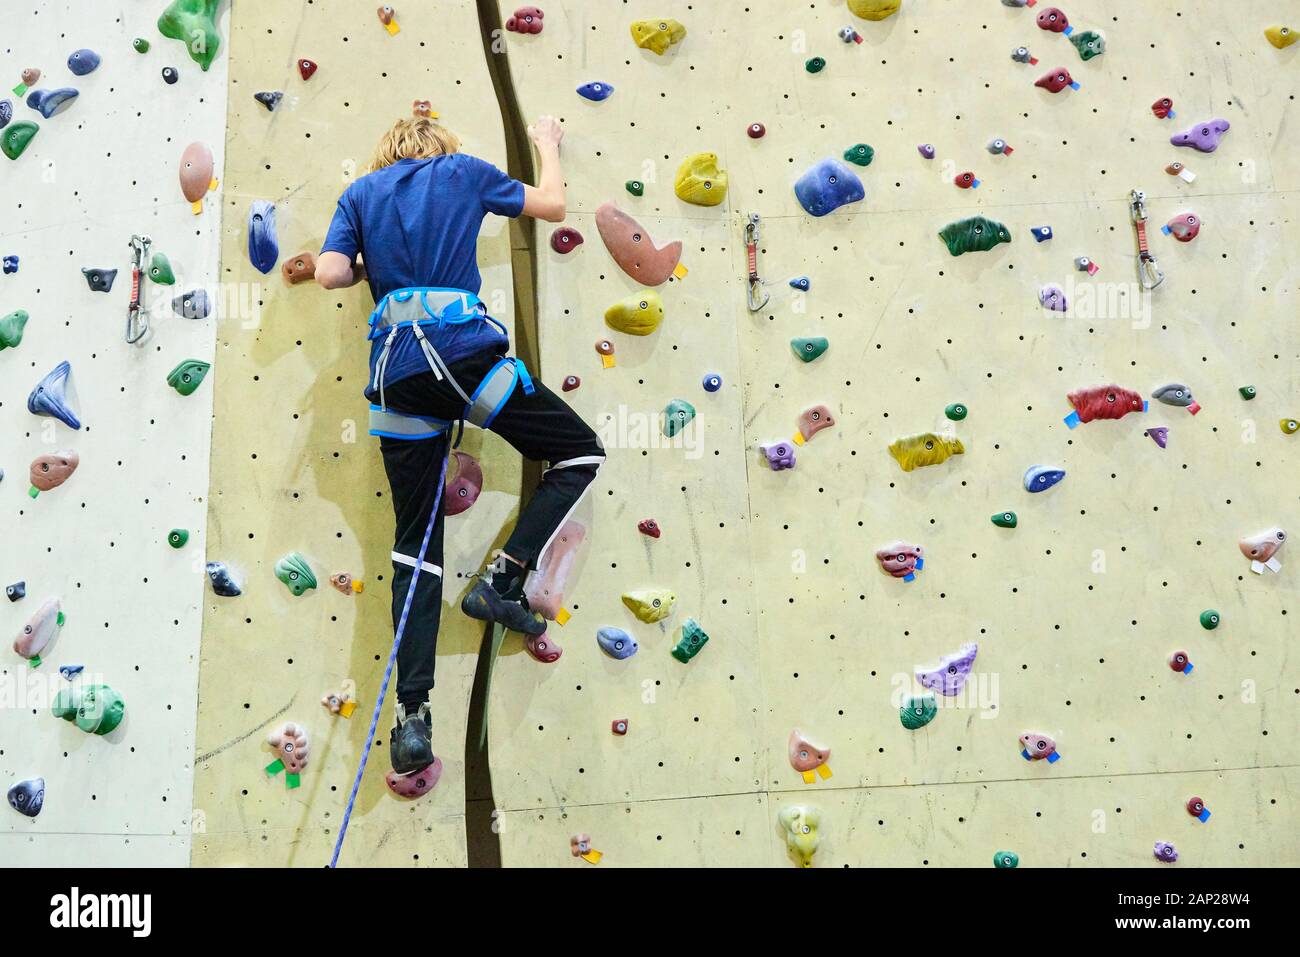 Free climber child young boy practicing on artificial boulders in gym, bouldering Stock Photo